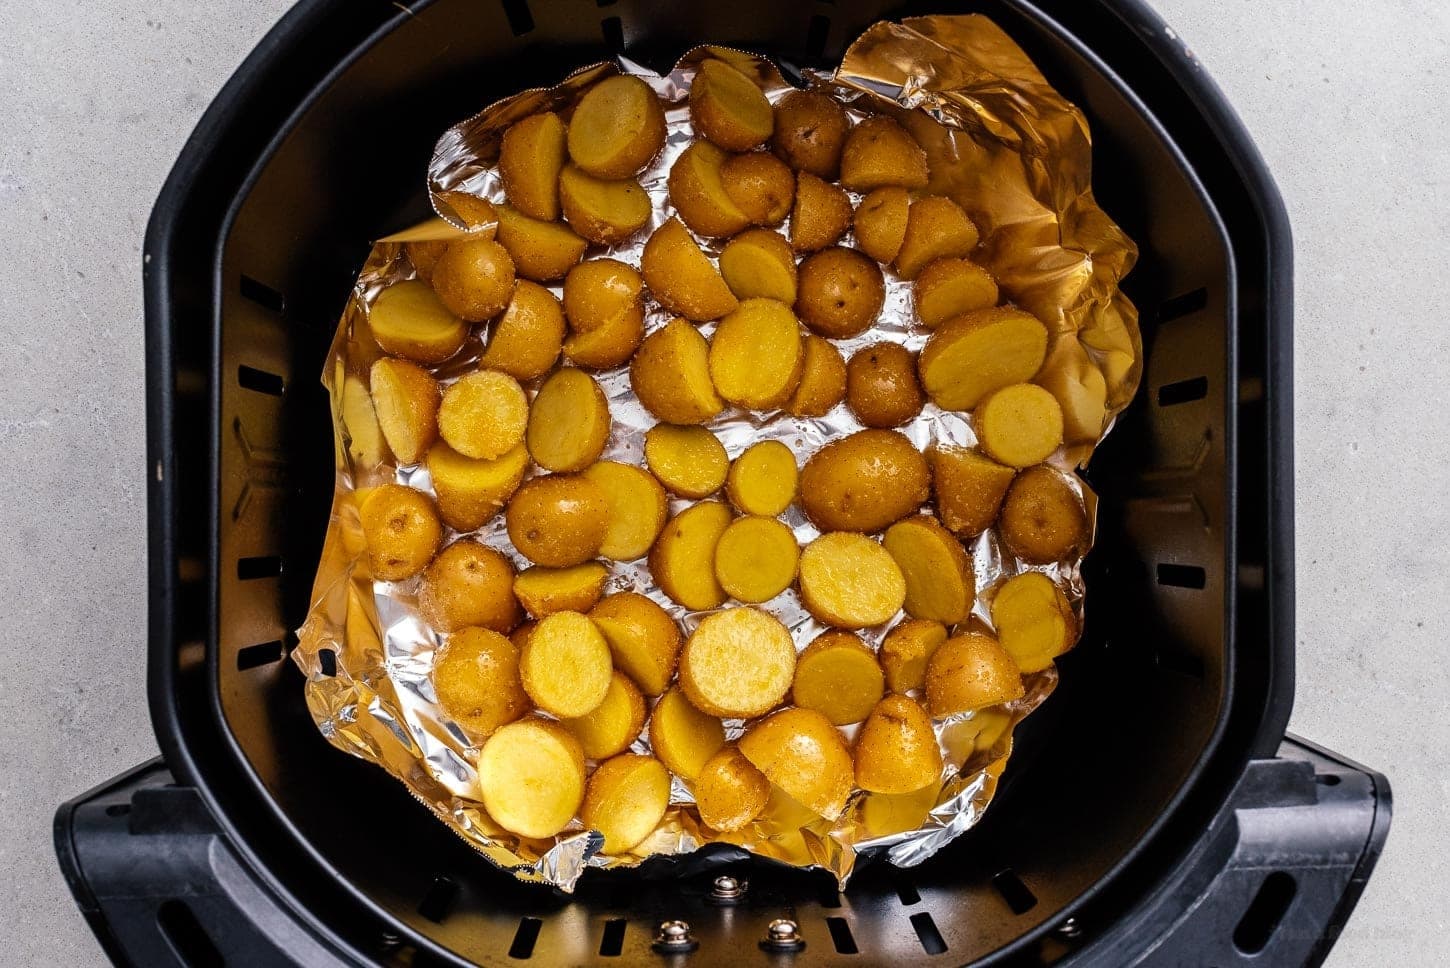 baby potatoes in air fryer | www.iamafoodblog.com